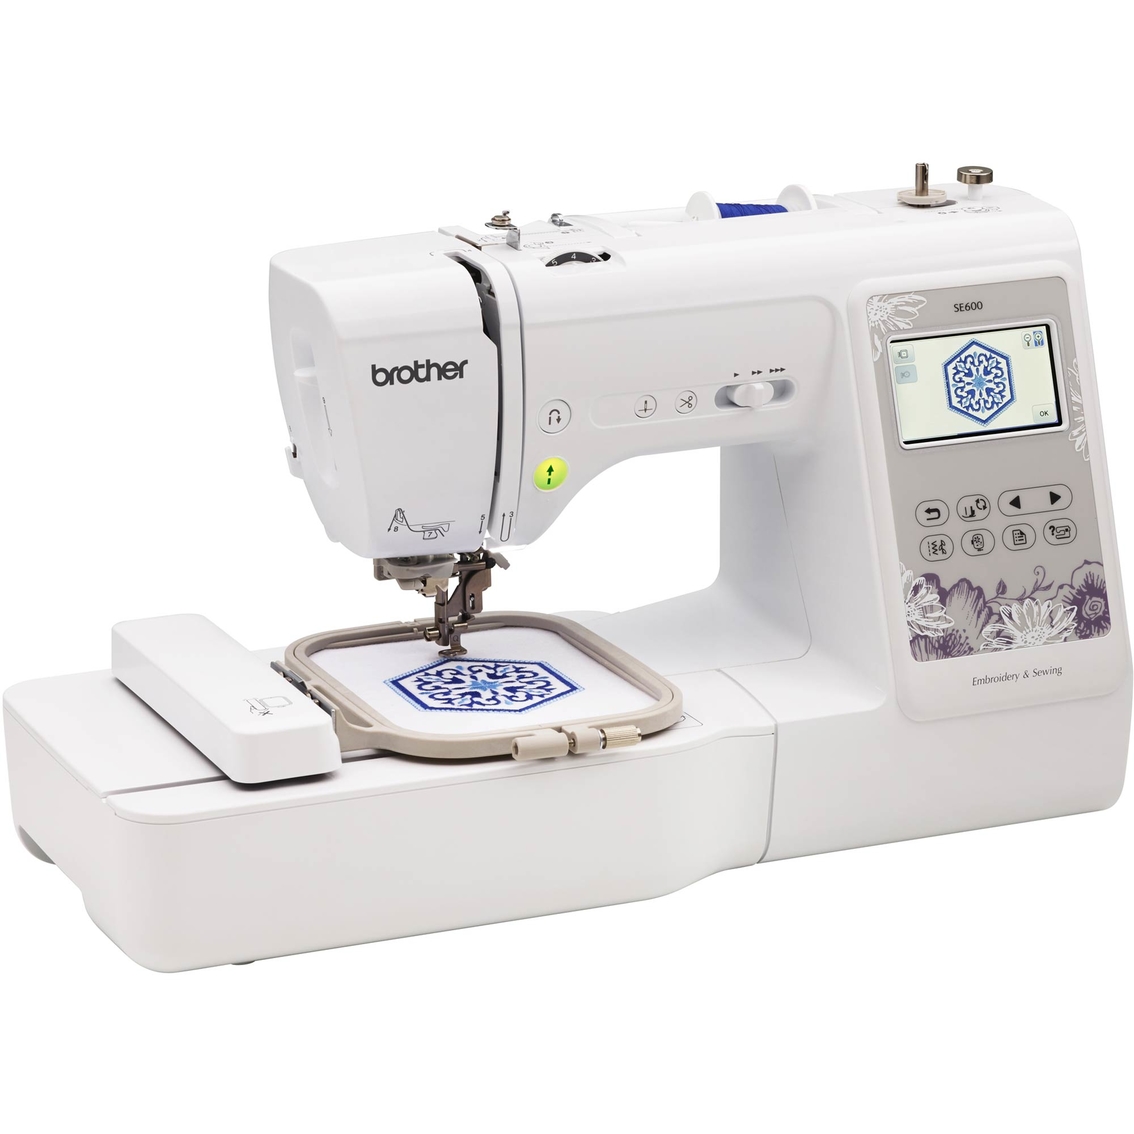 Computerized Embroidery Machines – Brother